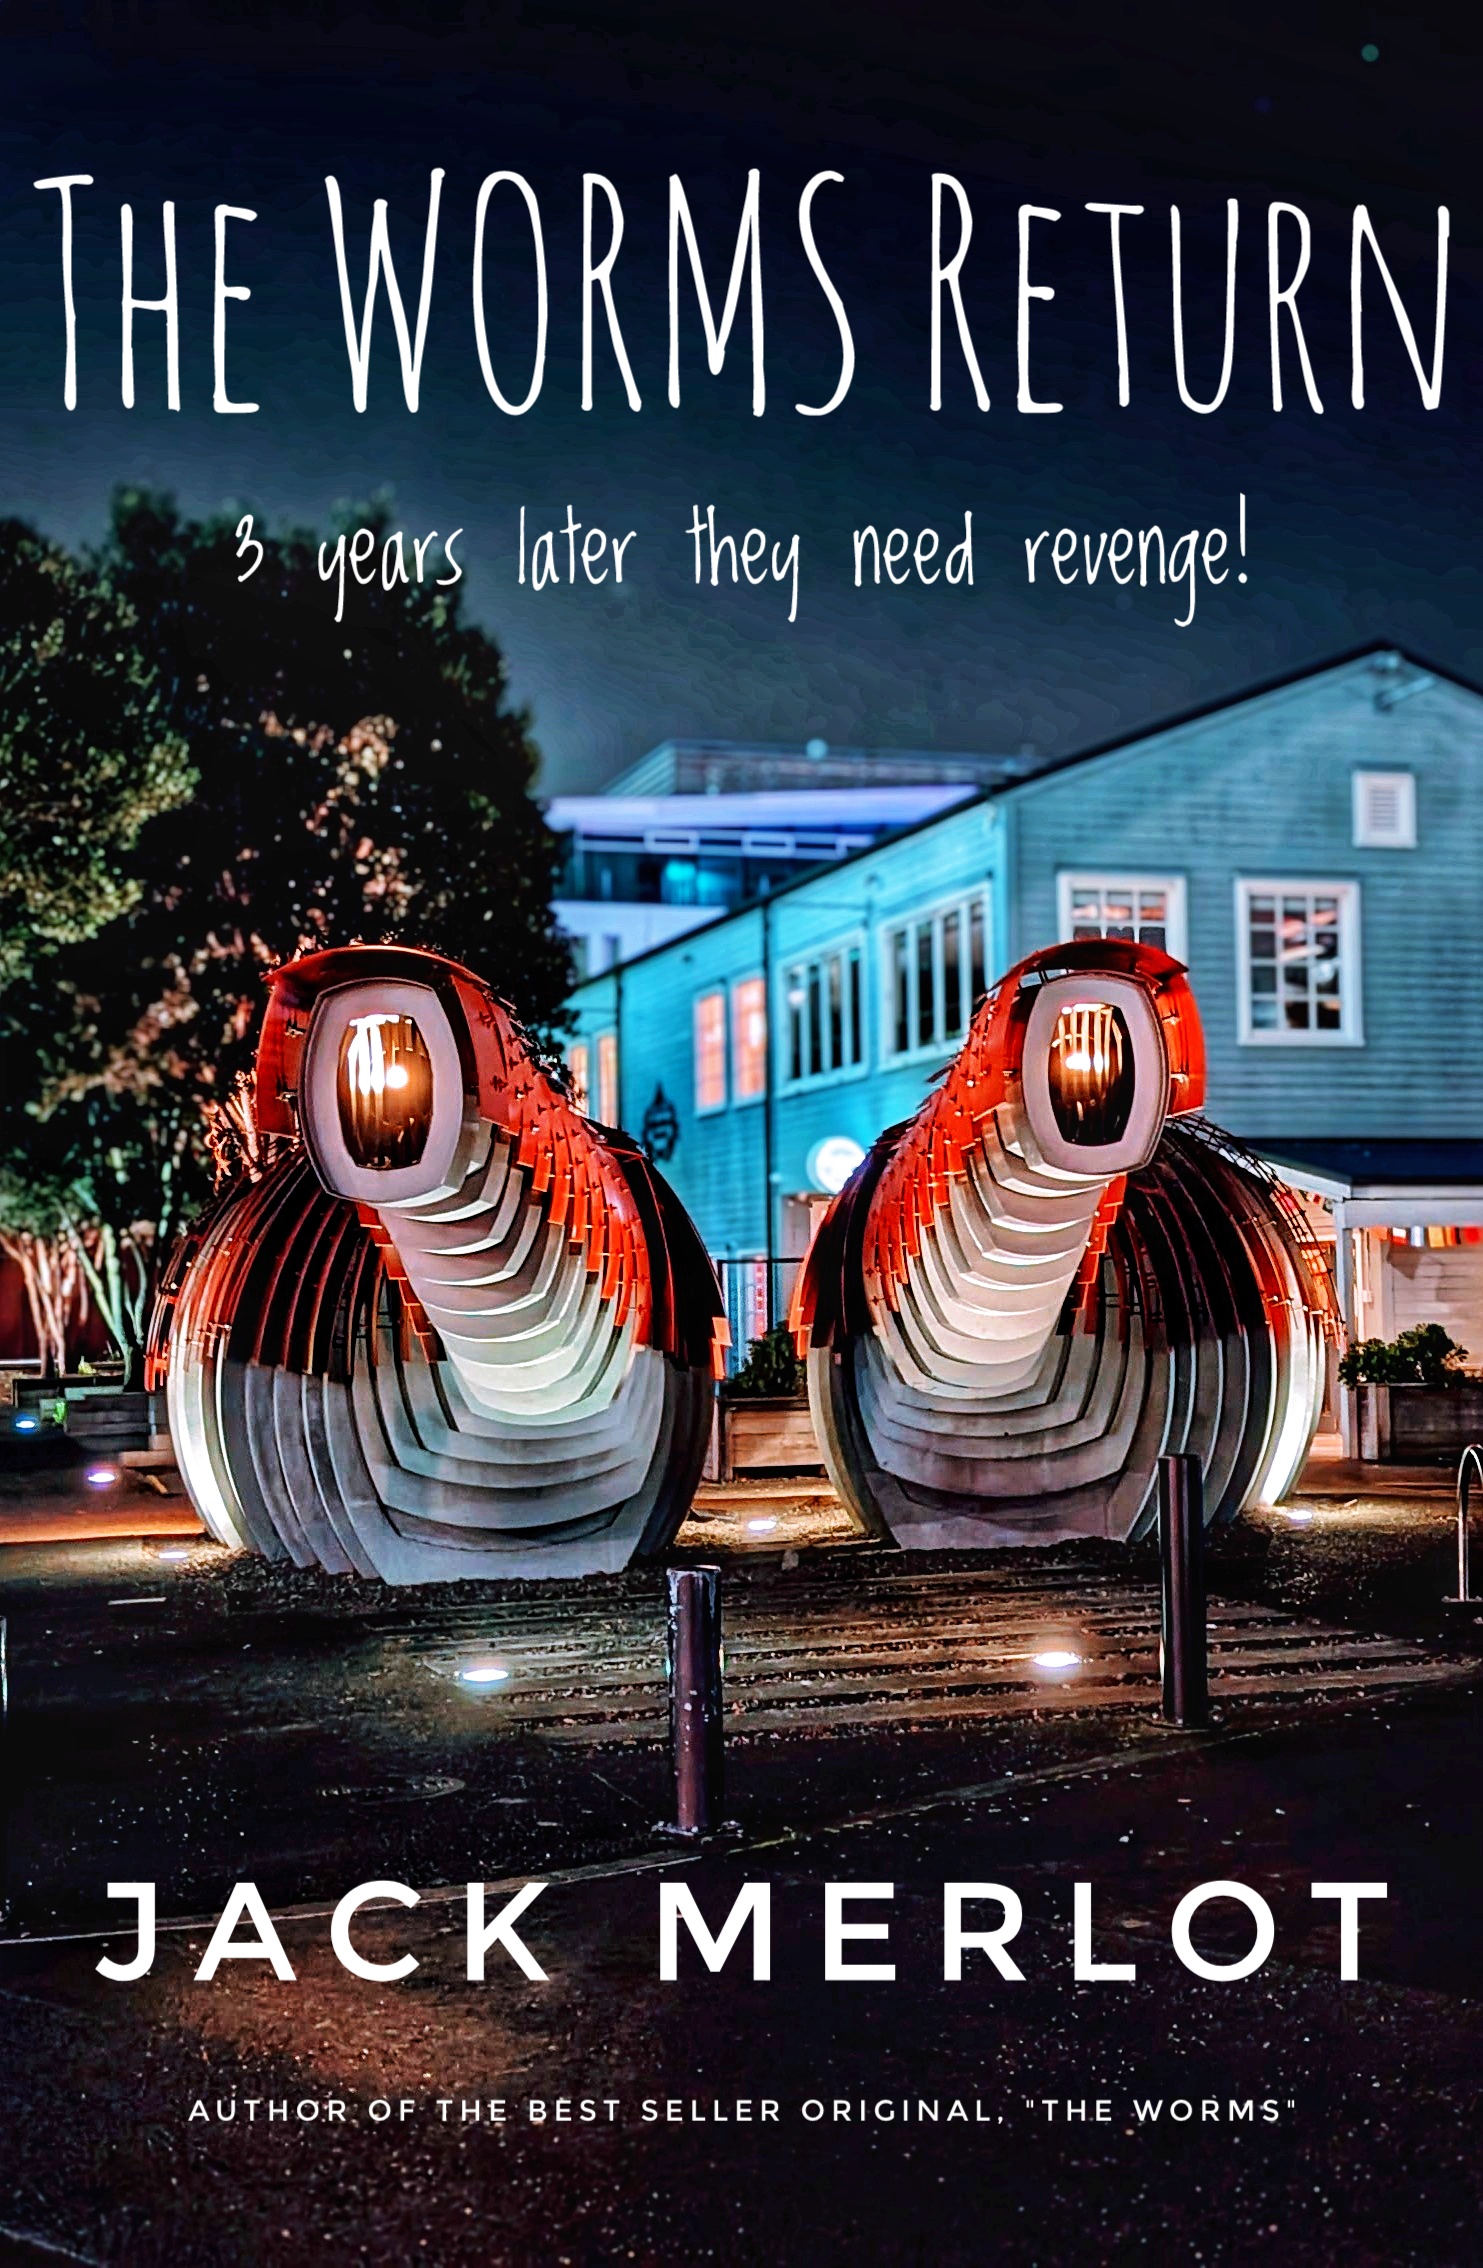 Imagined book cover, "The Worms Return", an edited night photo of the two stylised public toilets near the Wellington waterfront. Each with a rippled body (the toilet) with a protuberance that resemble the toothed mouth of a worm monster.